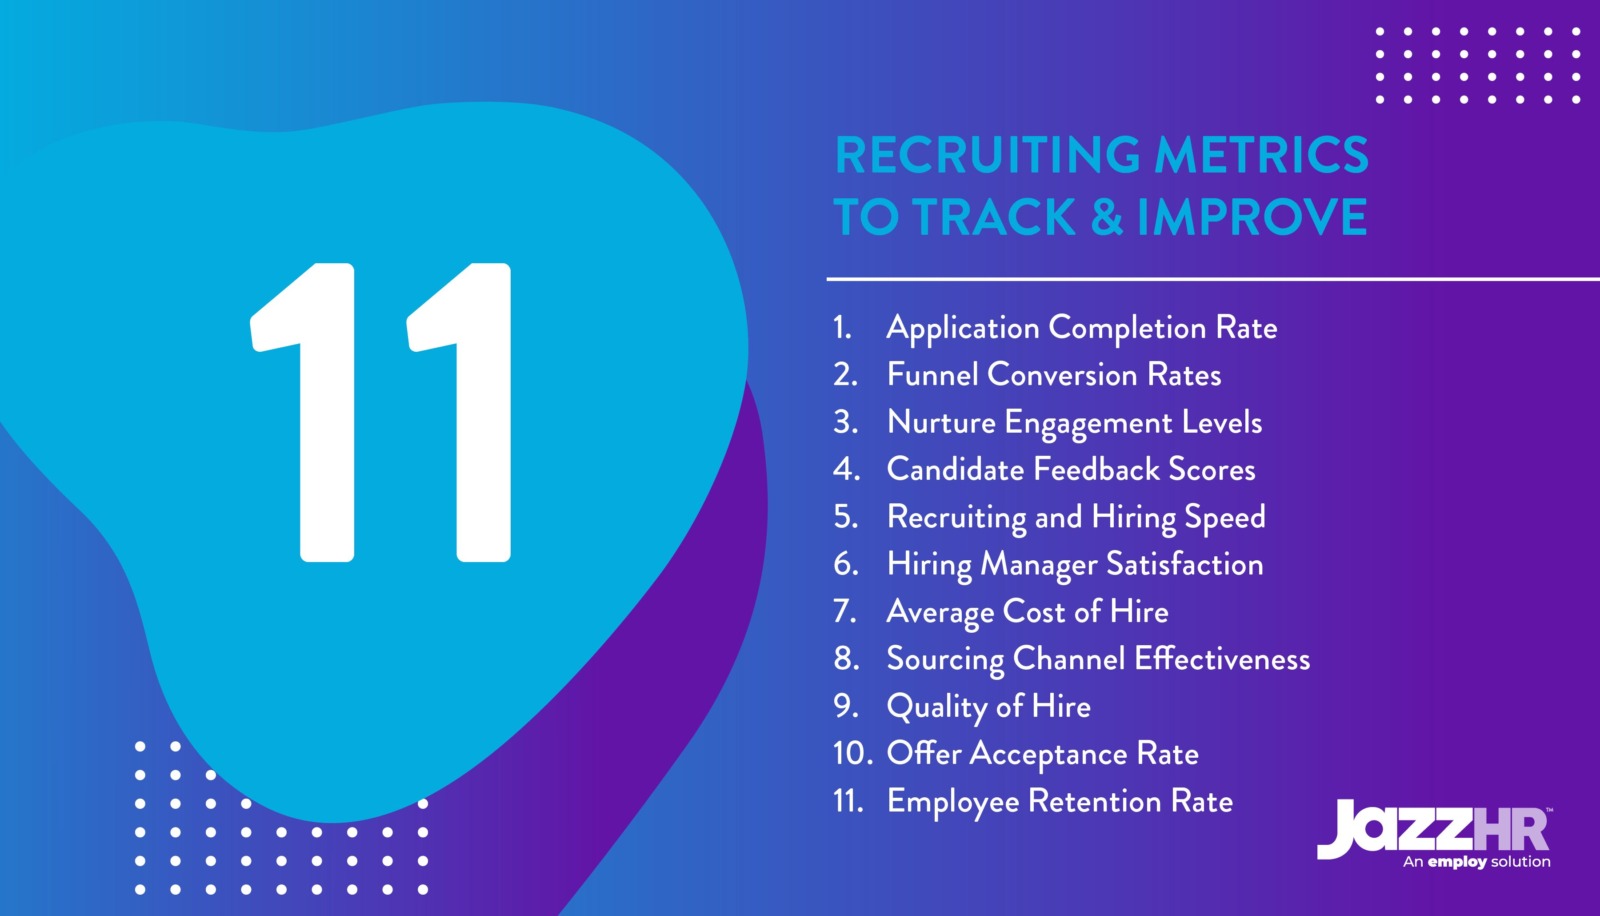 Metrics to track for data-driven recruiting, as discussed below.